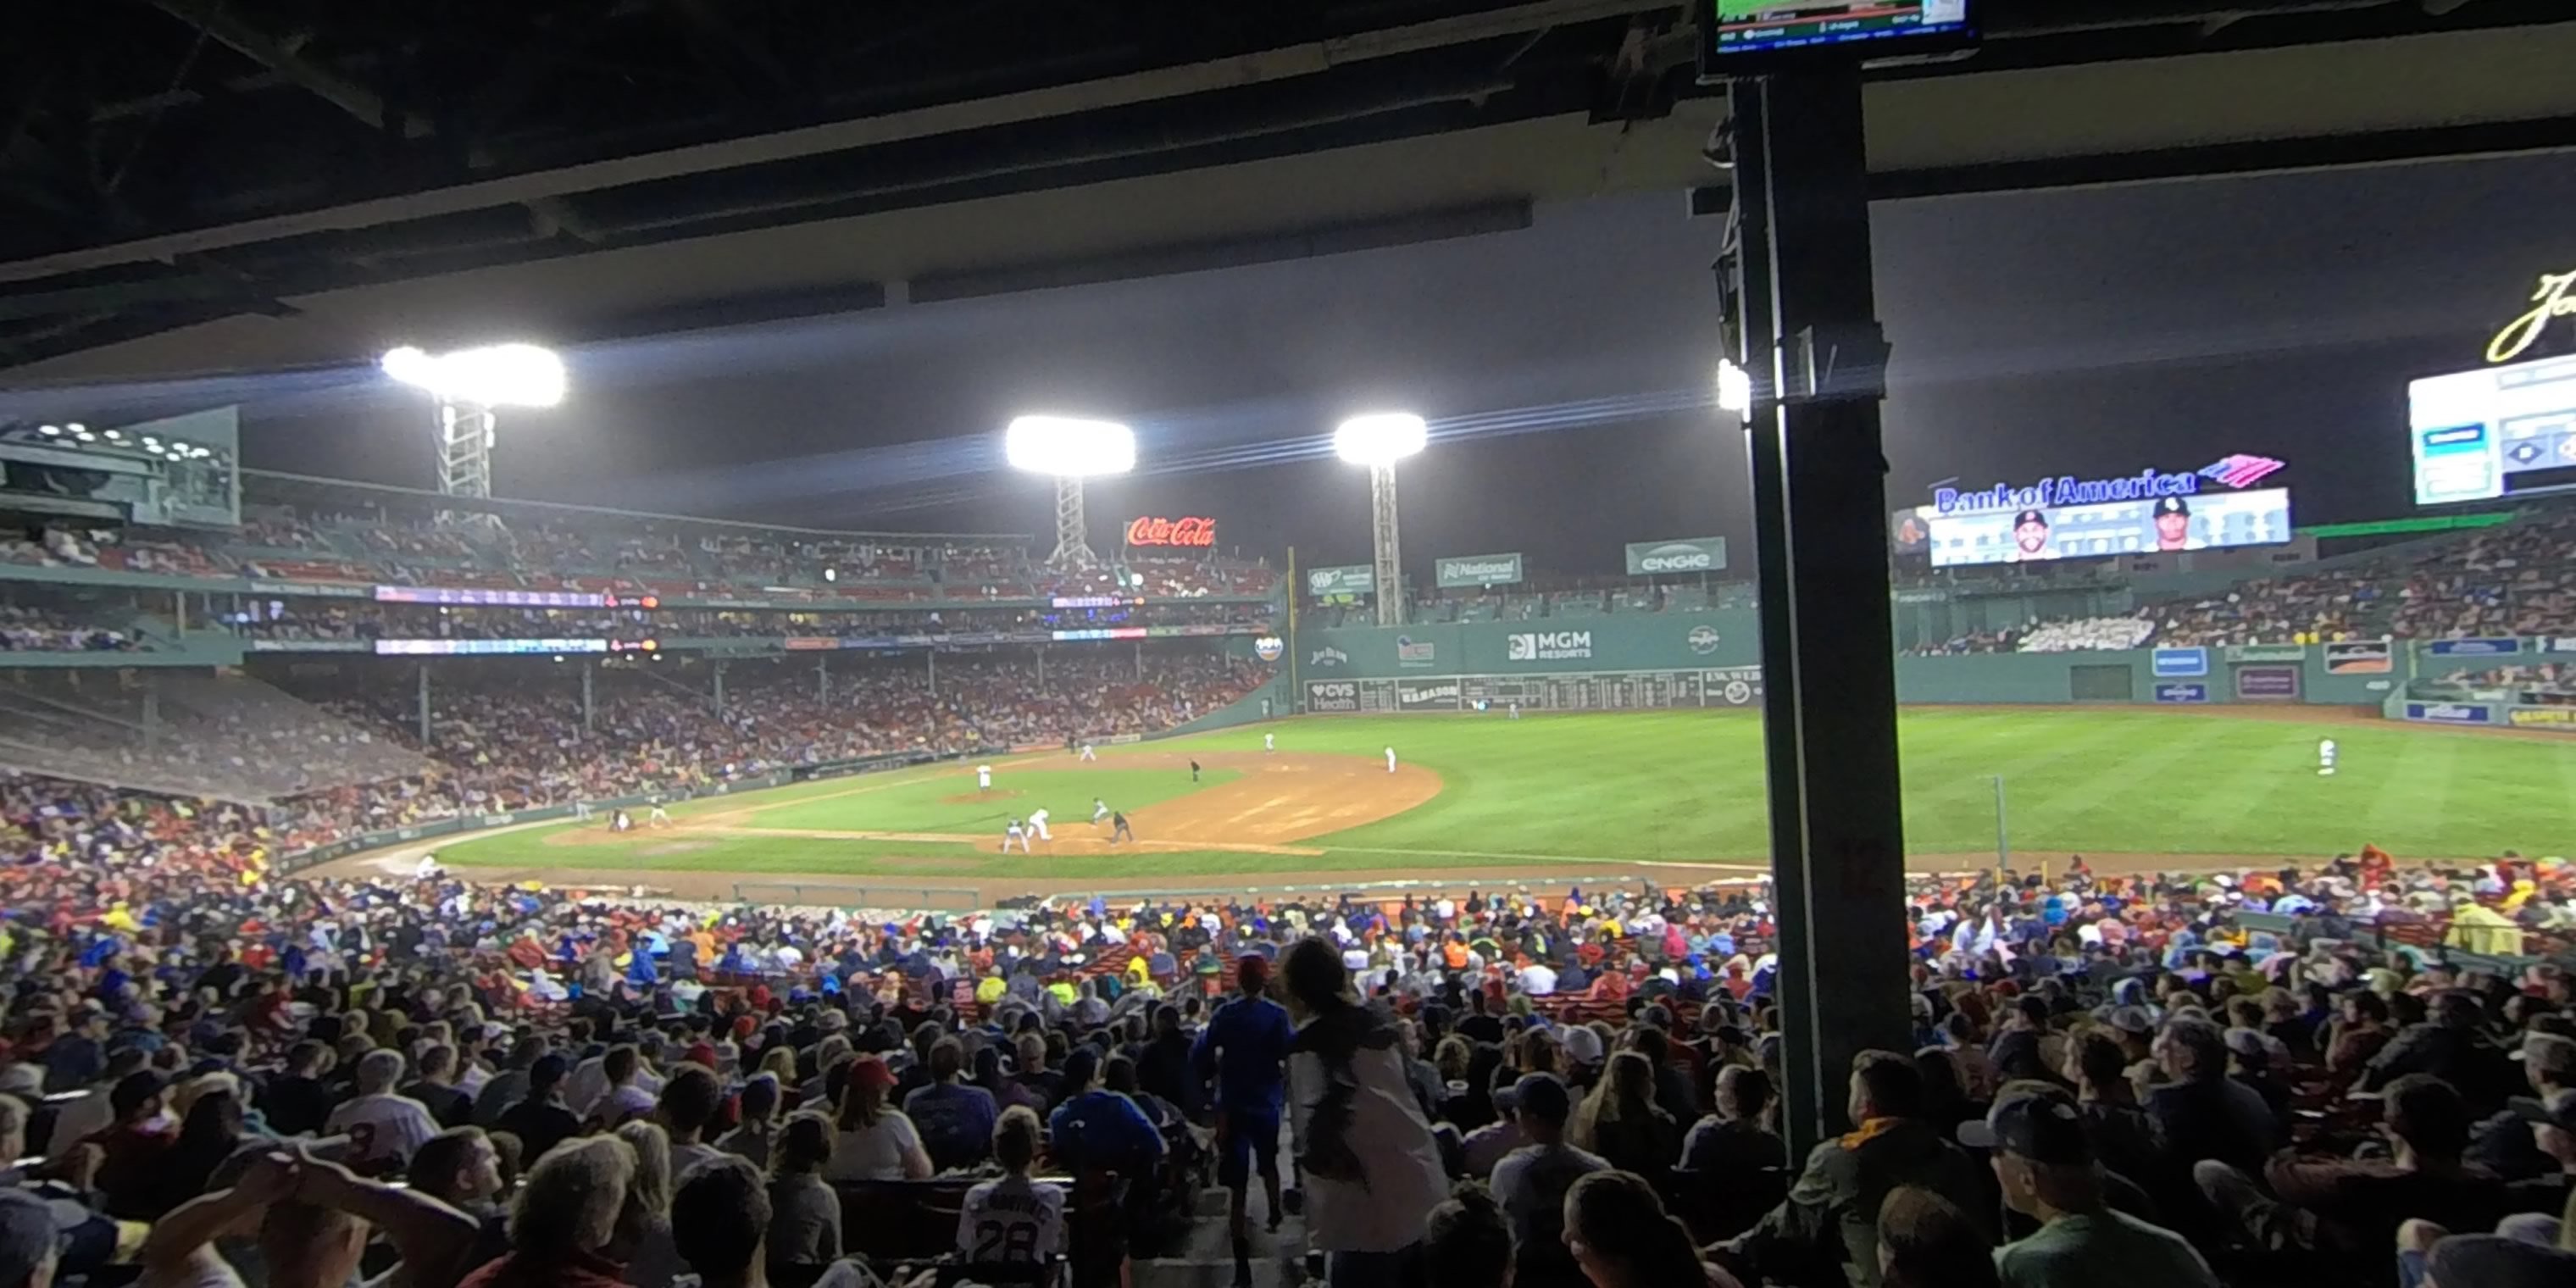 grandstand 12 panoramic seat view  for baseball - fenway park